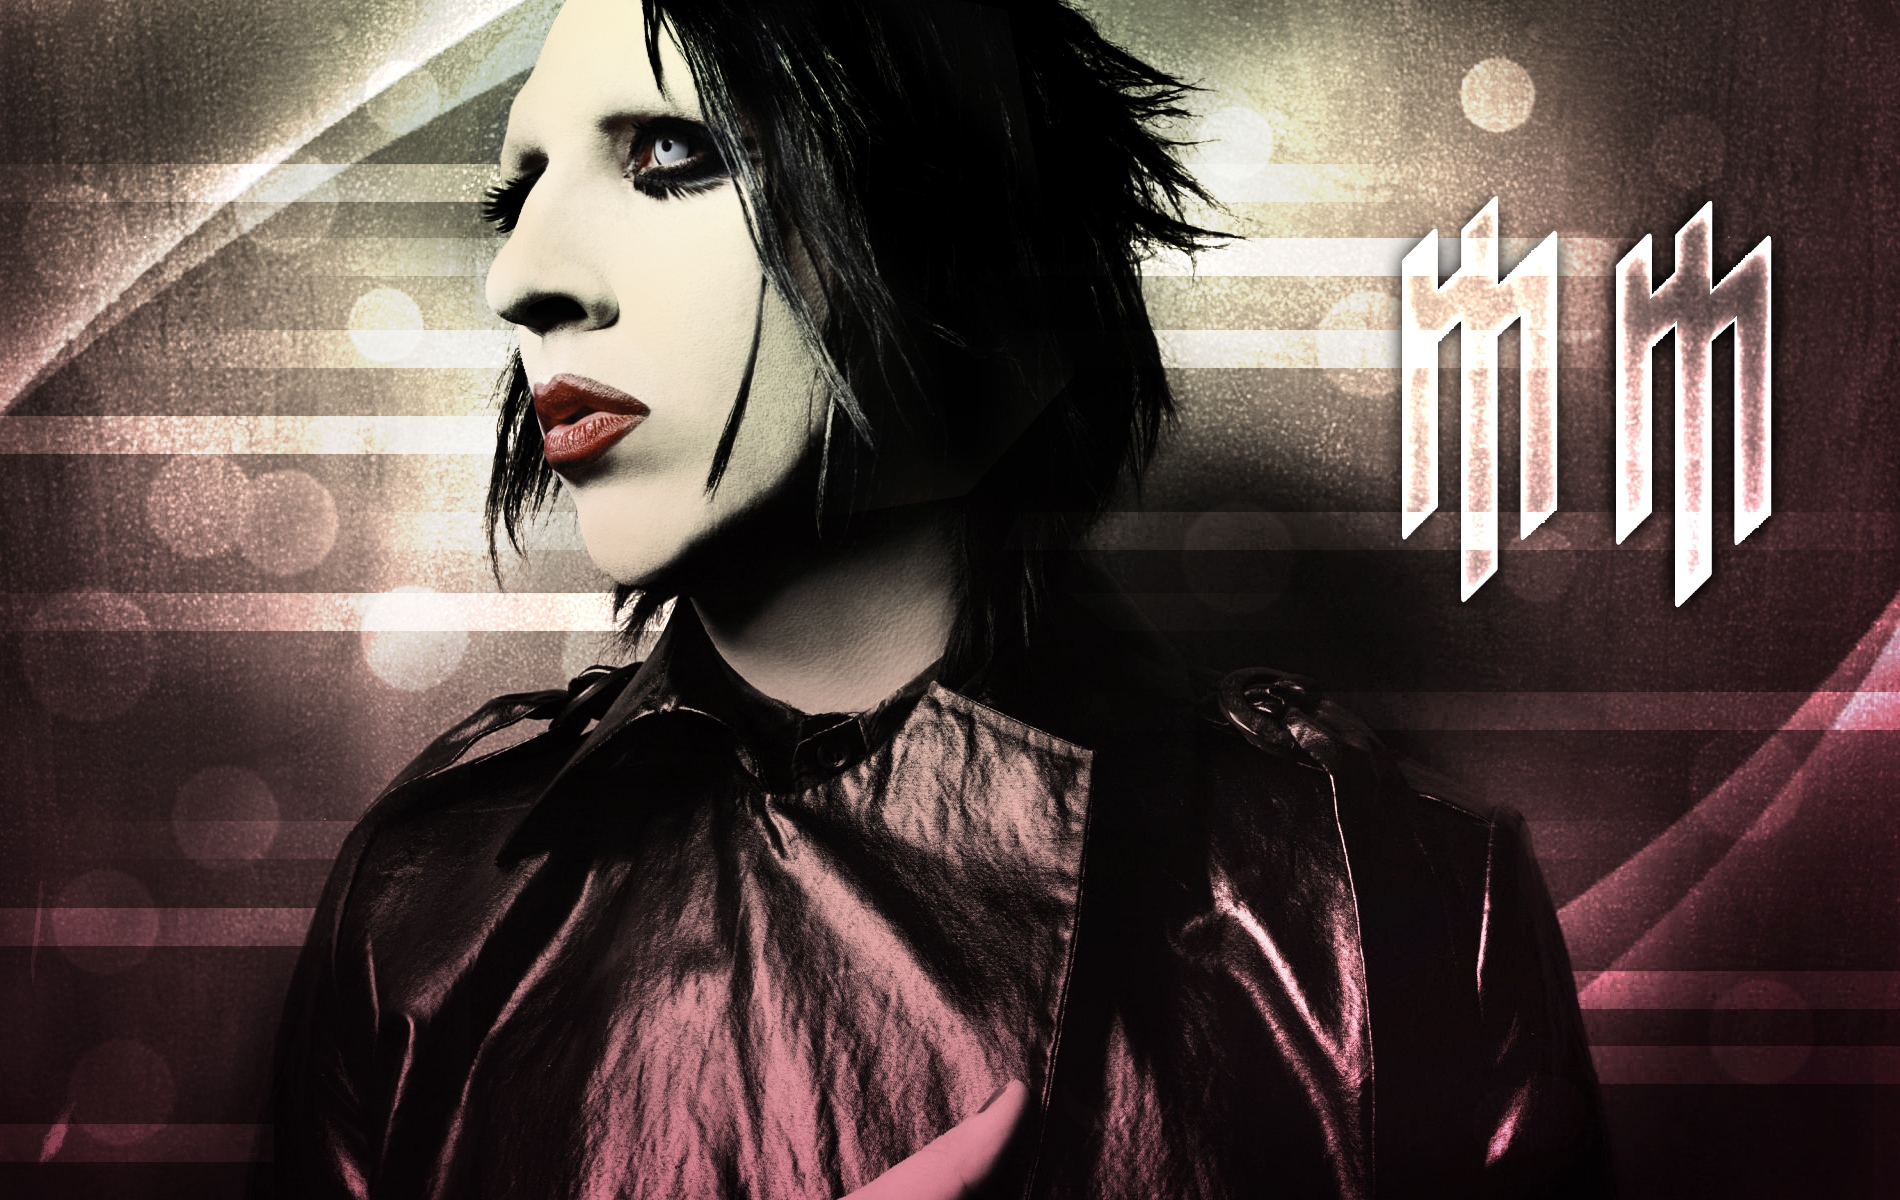 marilyn manson and the spooky kids wallpaper